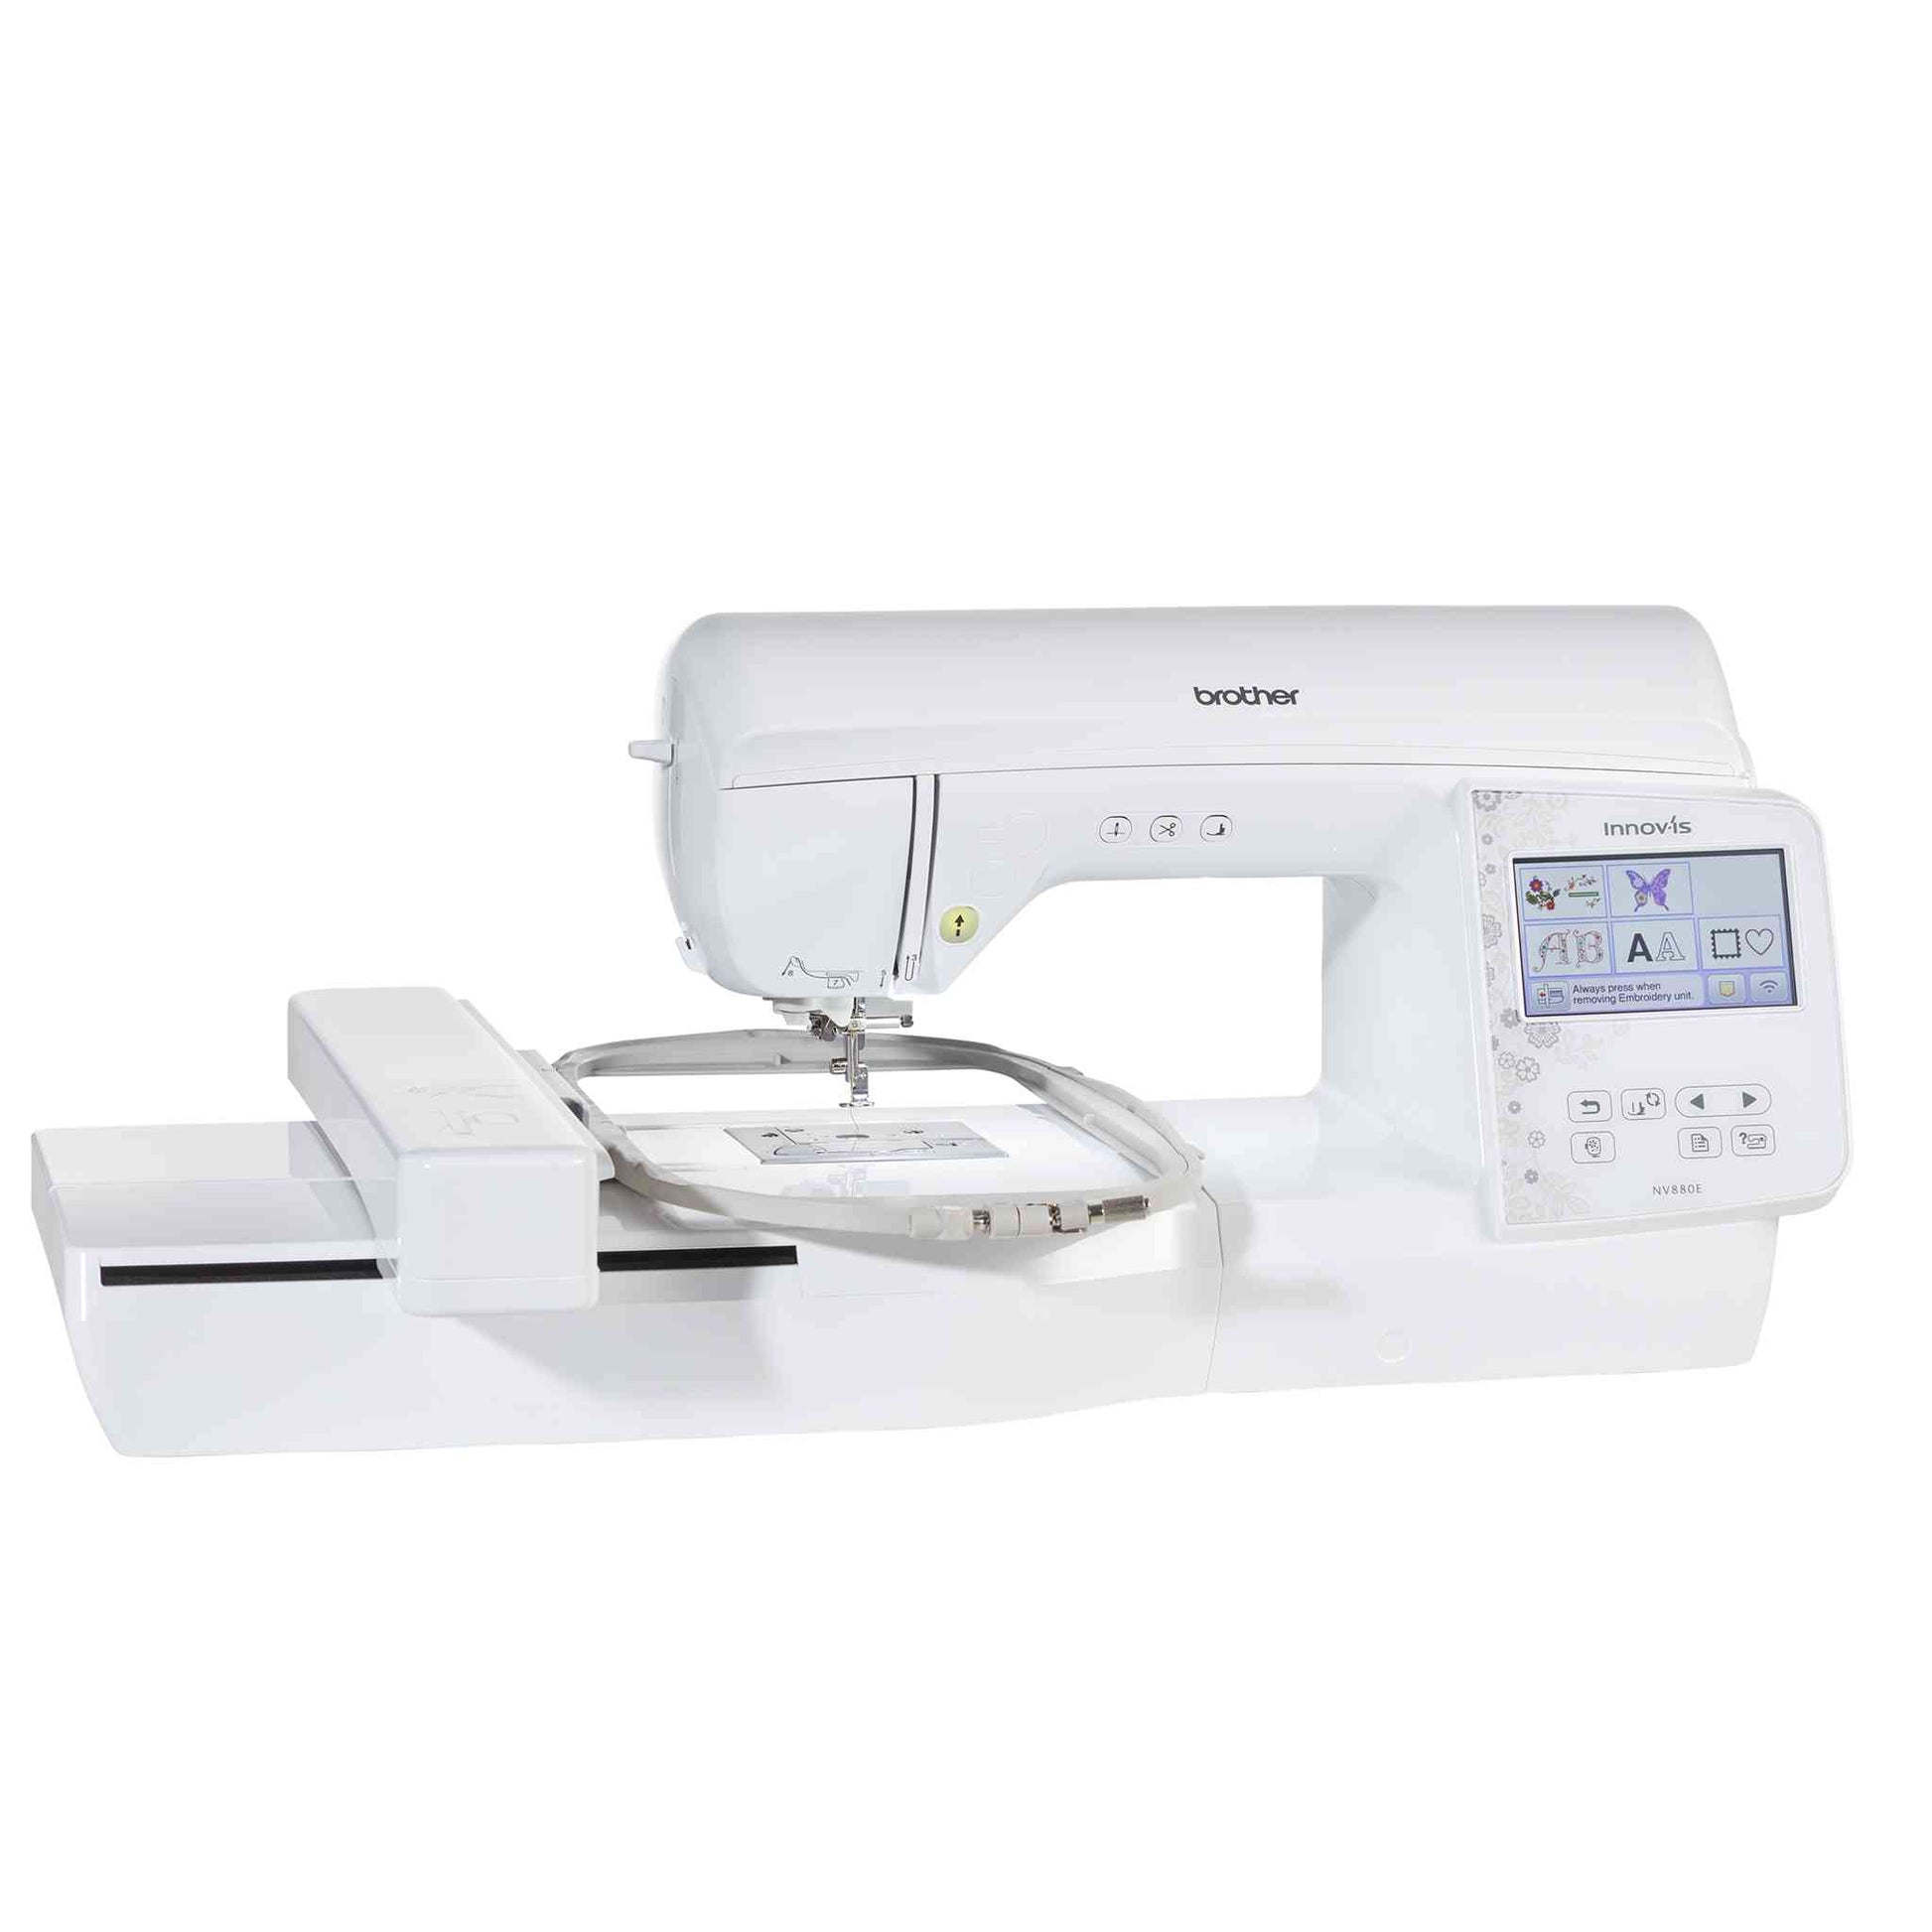 brother nv880e sewing and embroidery machine front view with hoop and embroidery unit attached, no fabric